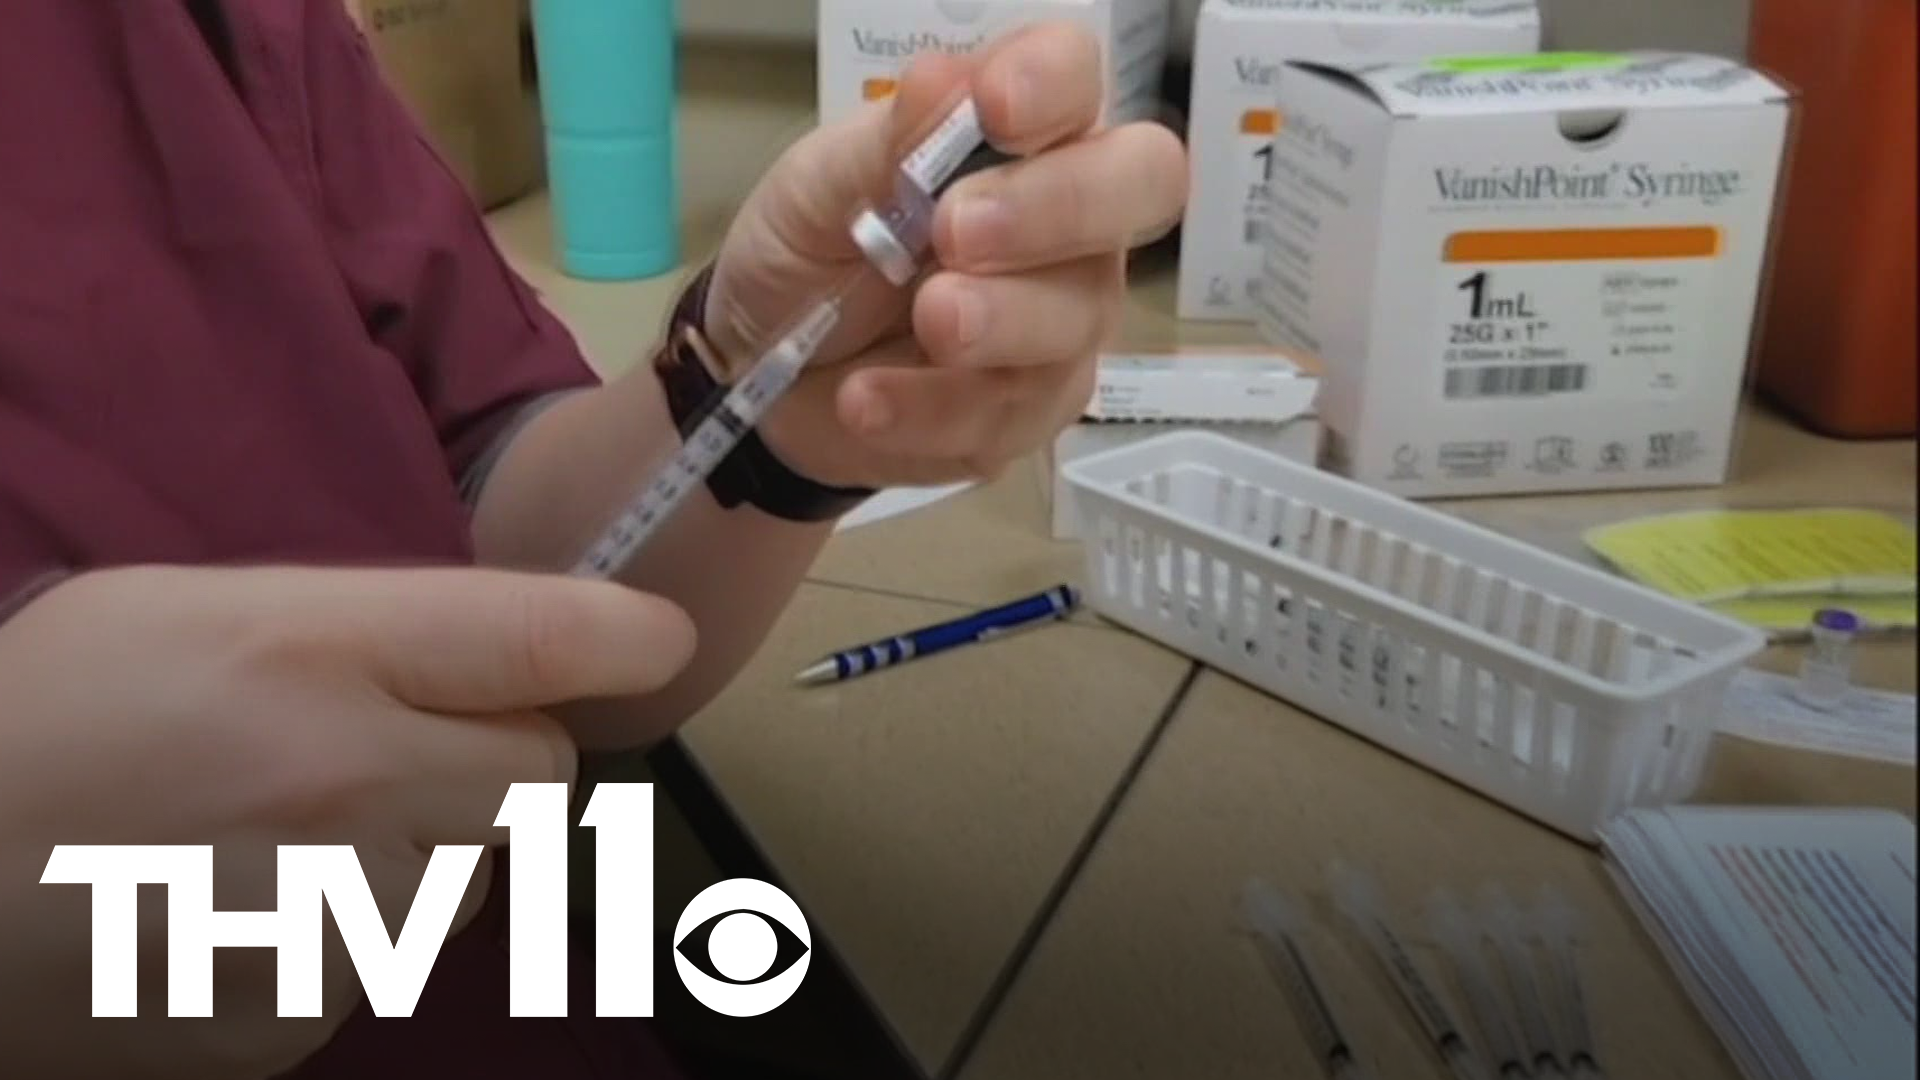 As lawmakers continue to discuss vaccine mandate proposals, one Arkansas woman is speaking out after she says she can't find a job because she isn't fully vaccinated